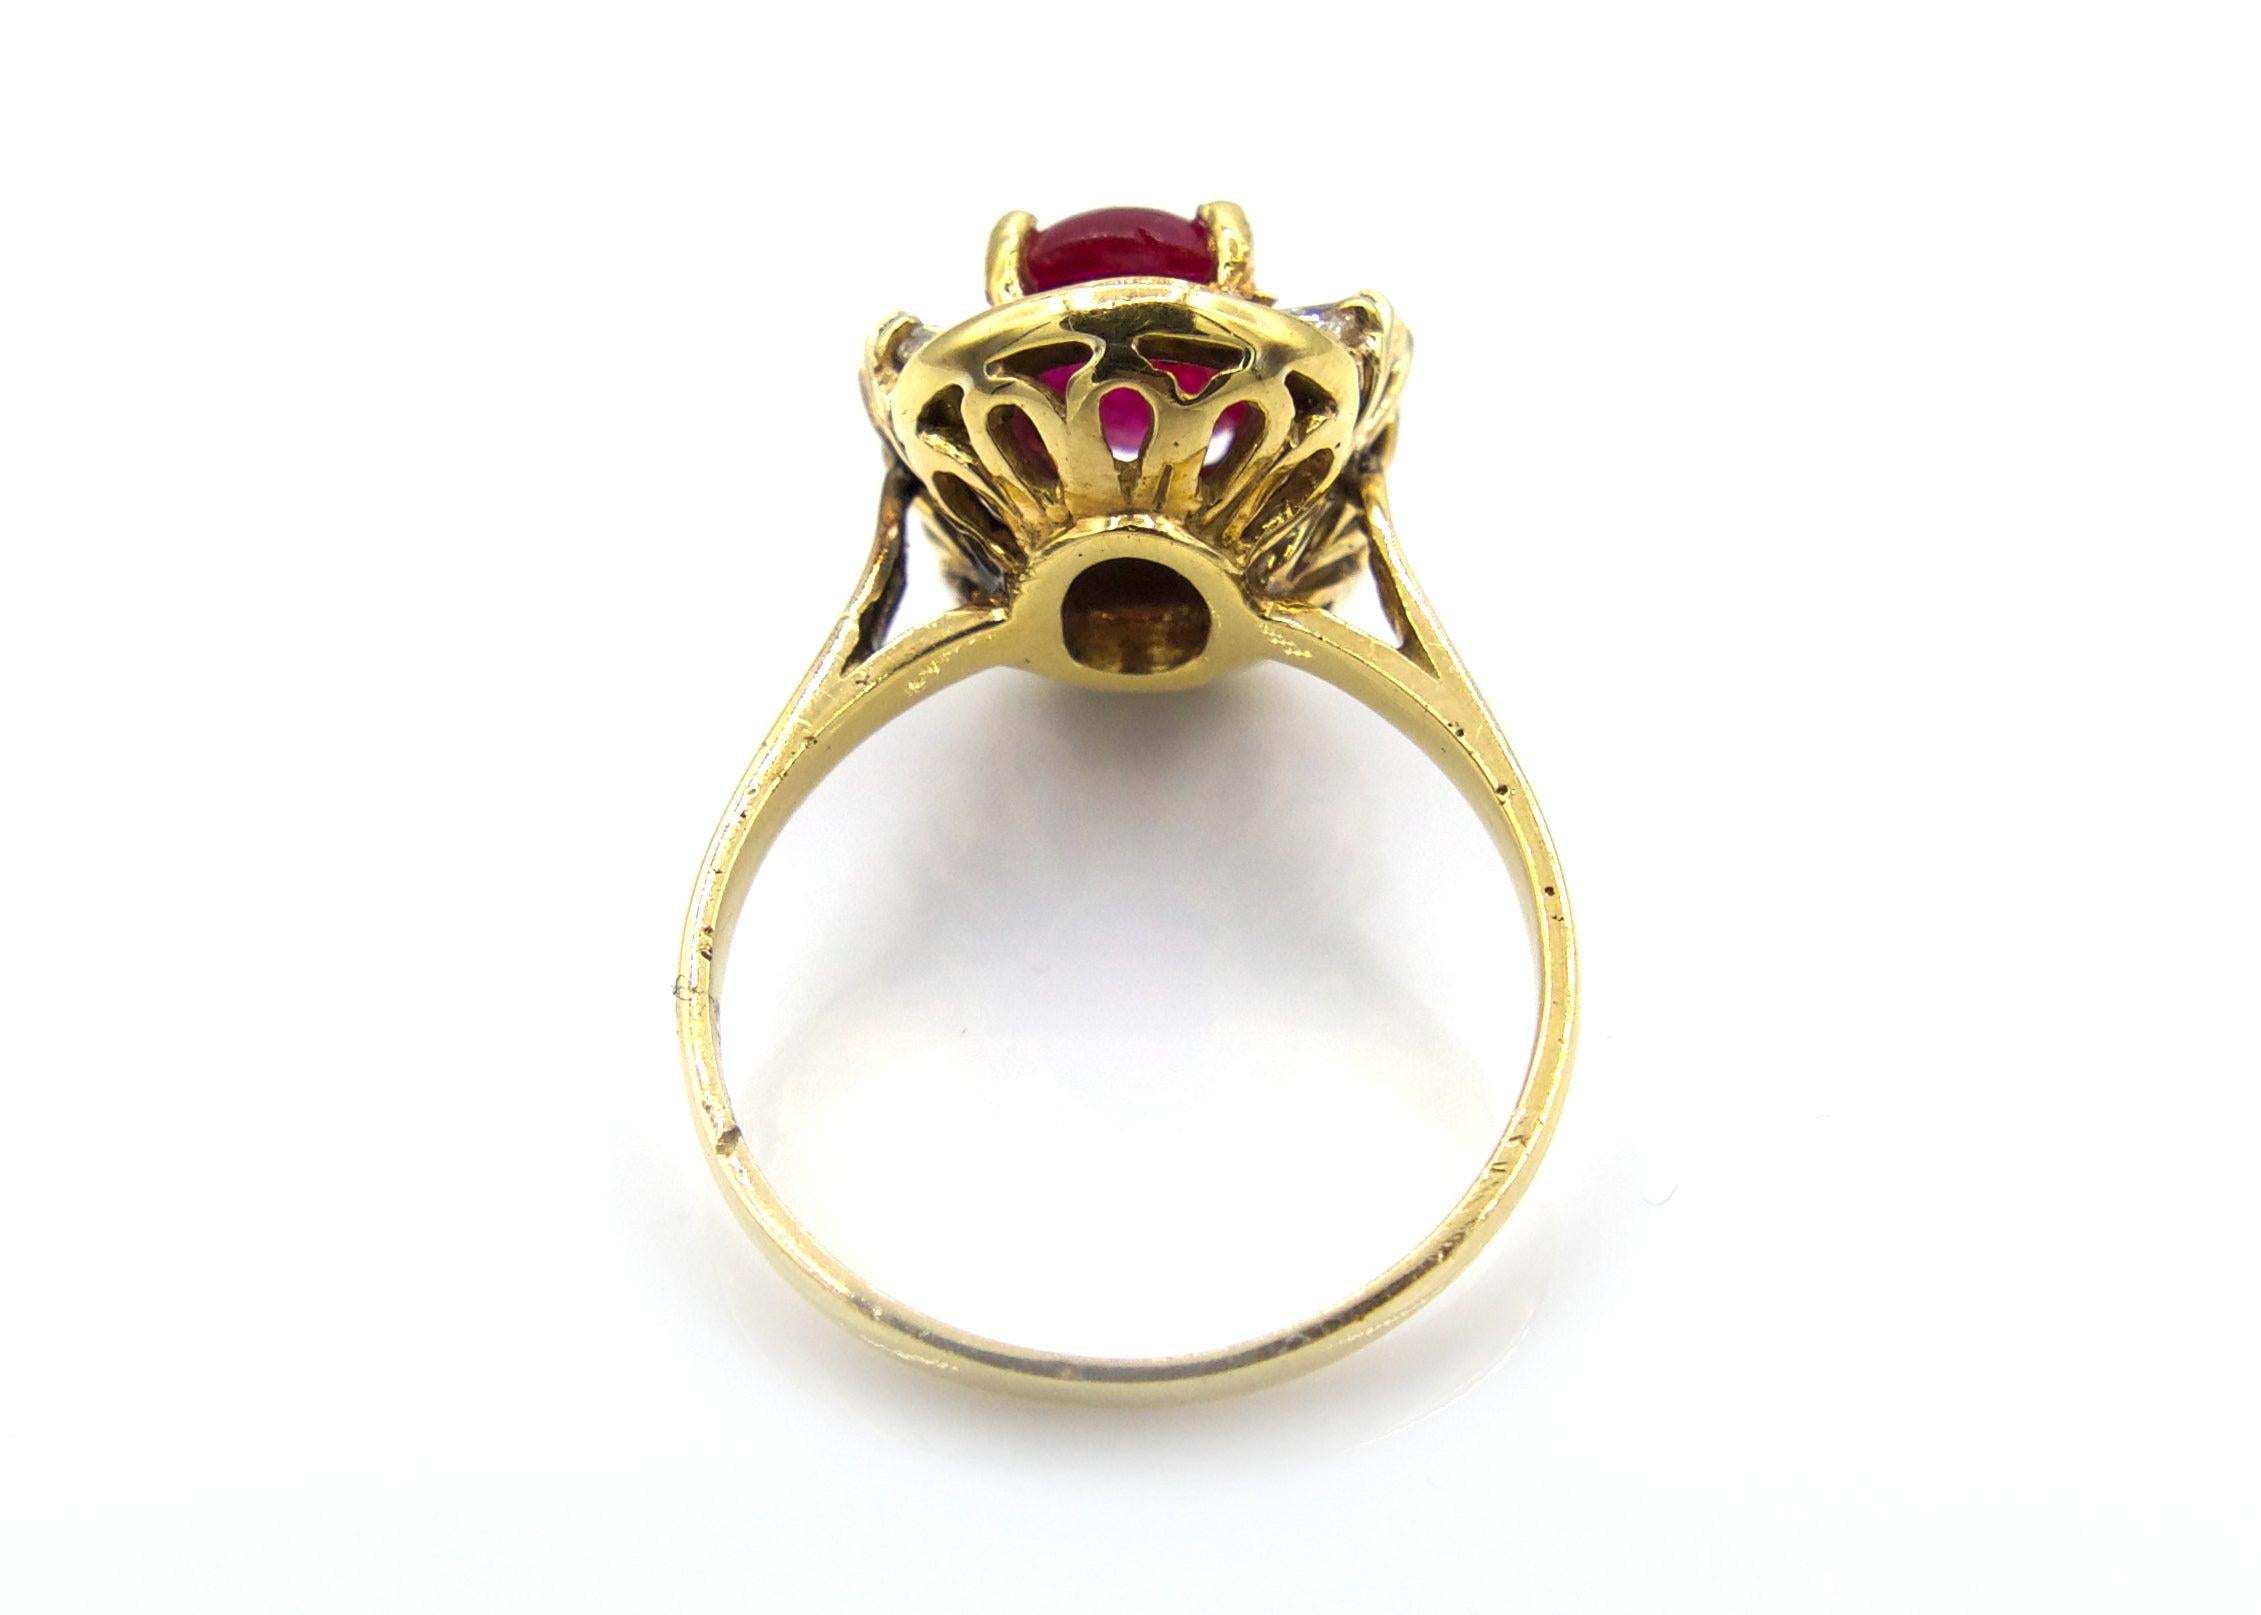 Retro Vintage Cabochon Ruby Diamond Cocktail Ring For Sale